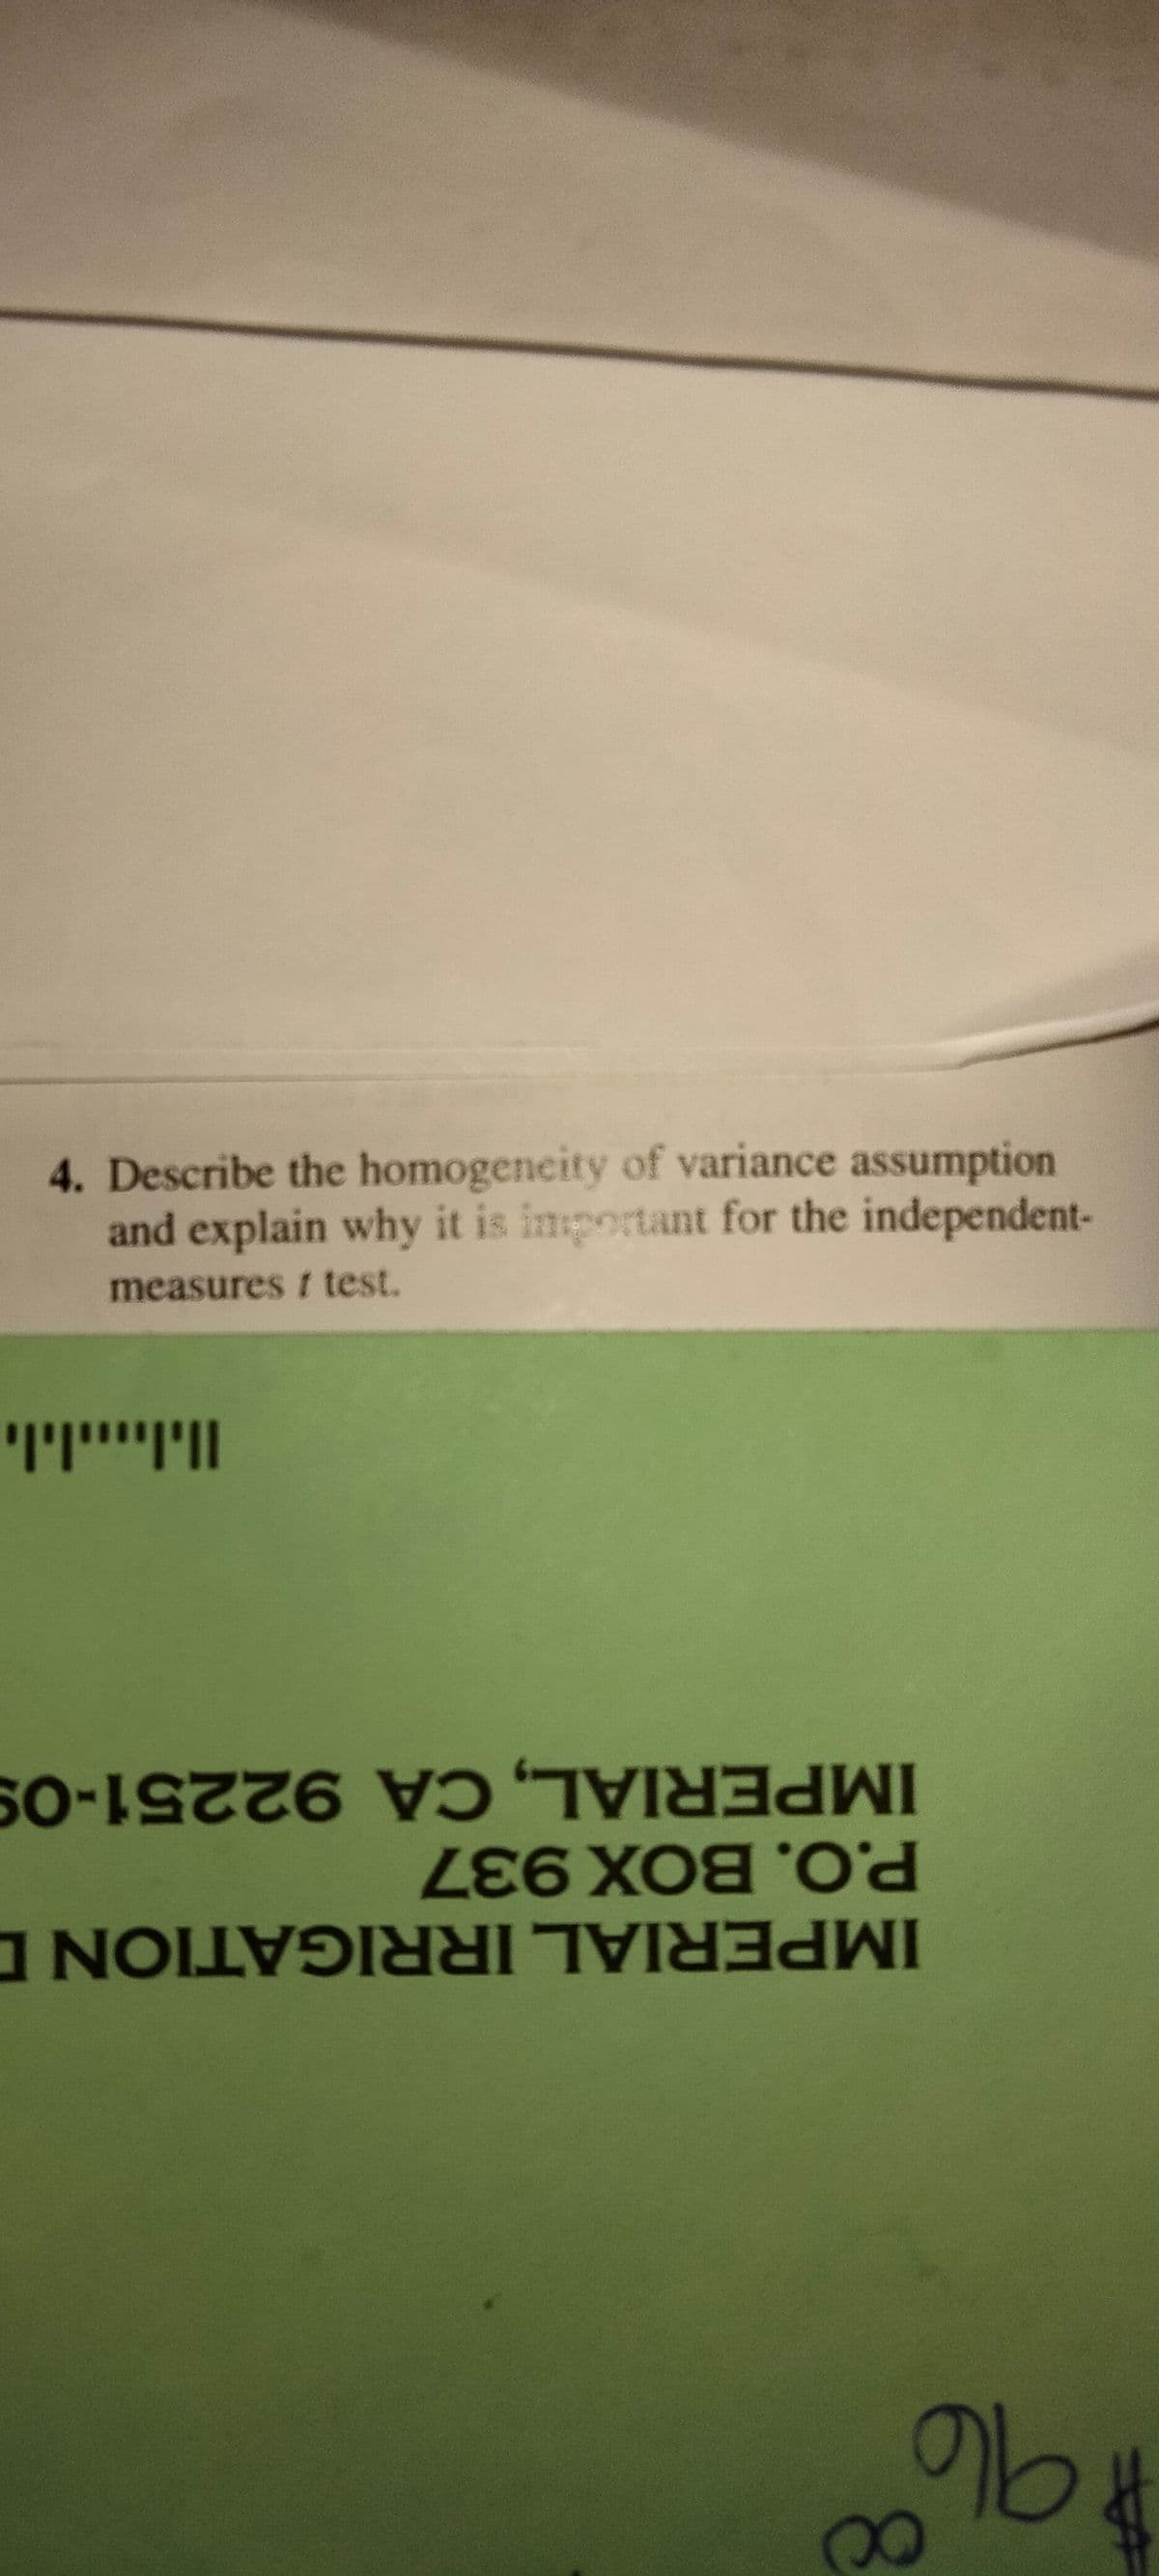 4. Describe the homogeneity of variance assumption
and explain why it is inportant for the independent-
measures t test.
ןויוייייויוי
IMPERIAL, CA 92251-09
P.O.BOX 937
IMPERIAL IRRIGATION D
96
